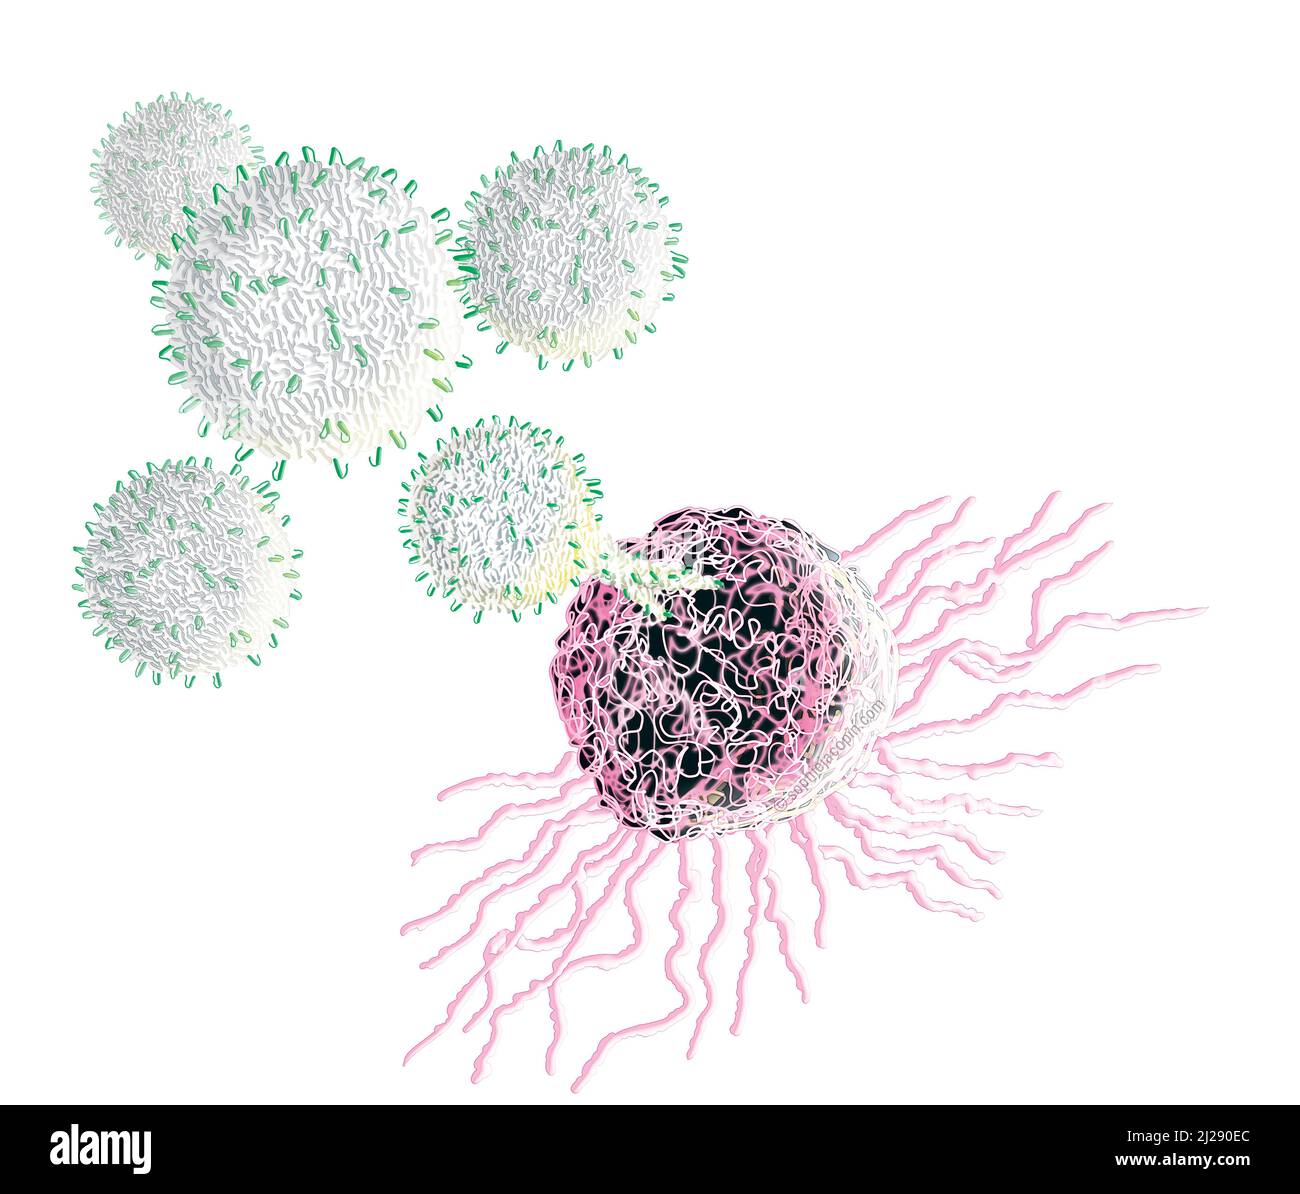 Tumor cell-immunotherapy Stock Photo